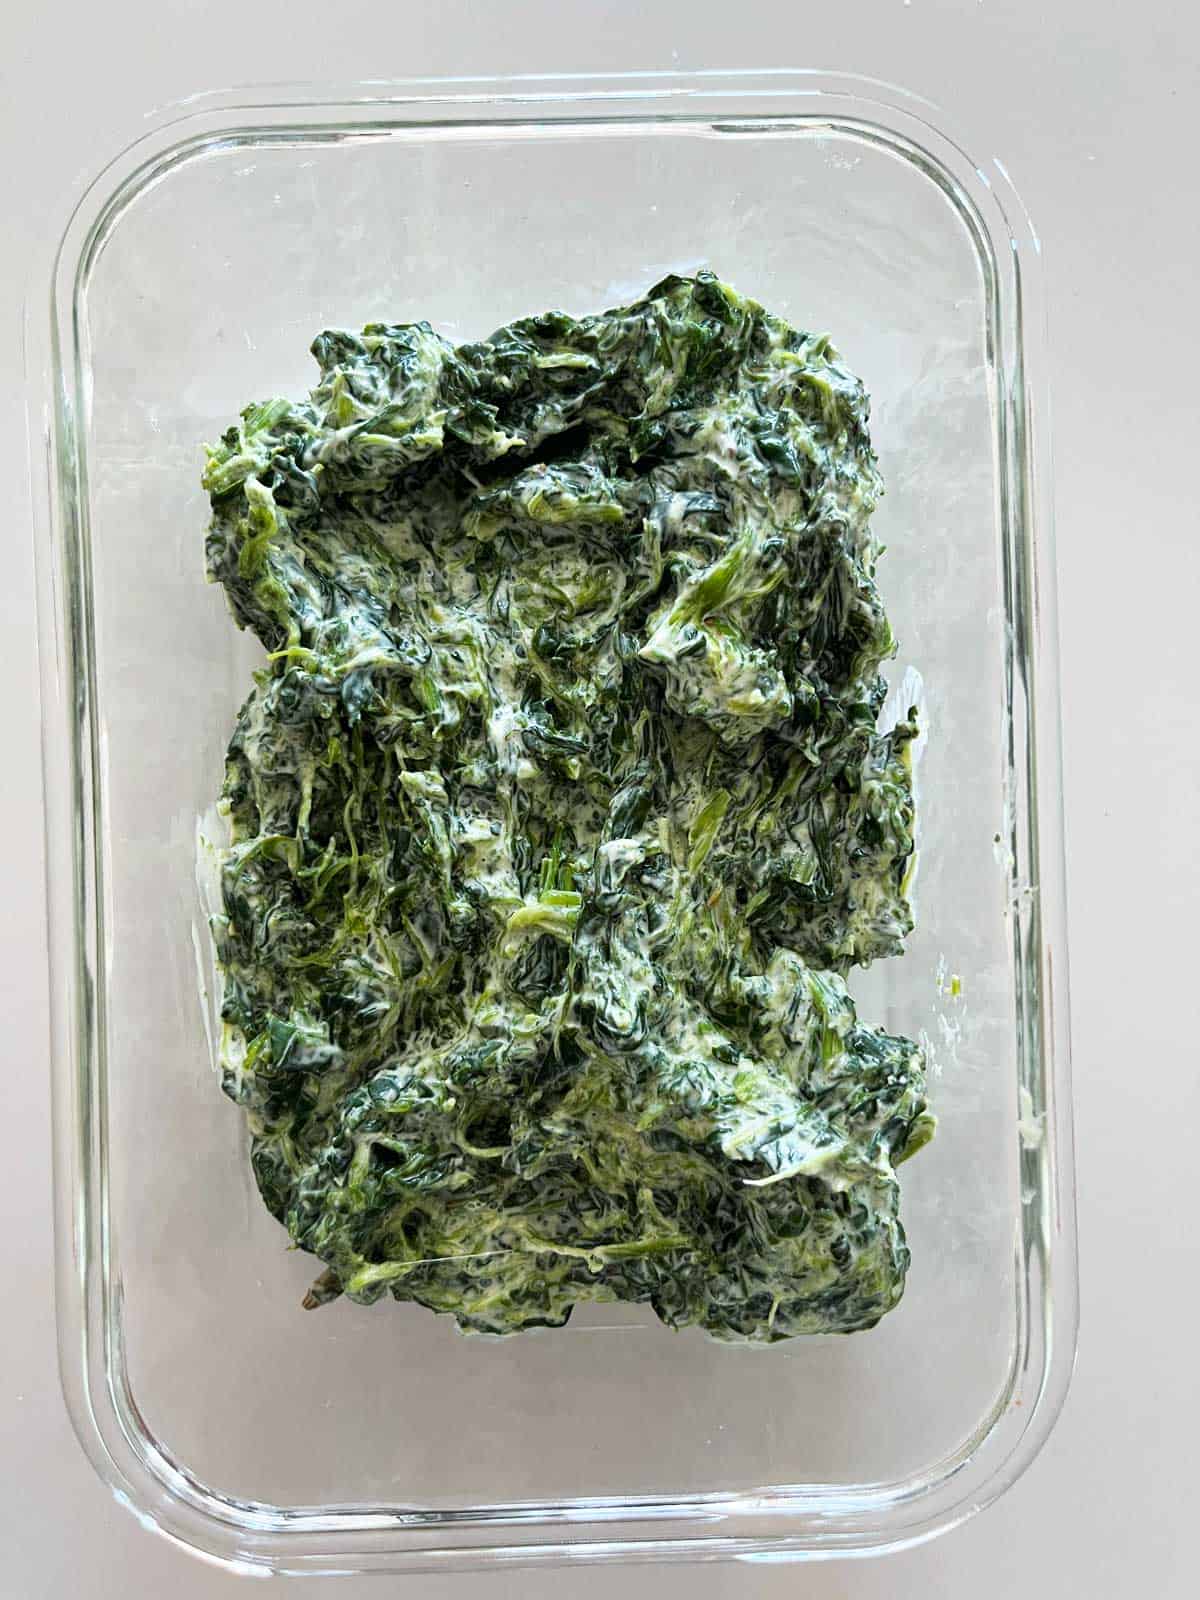 Leftovers of creamed spinach are stored in a glass food storage container.